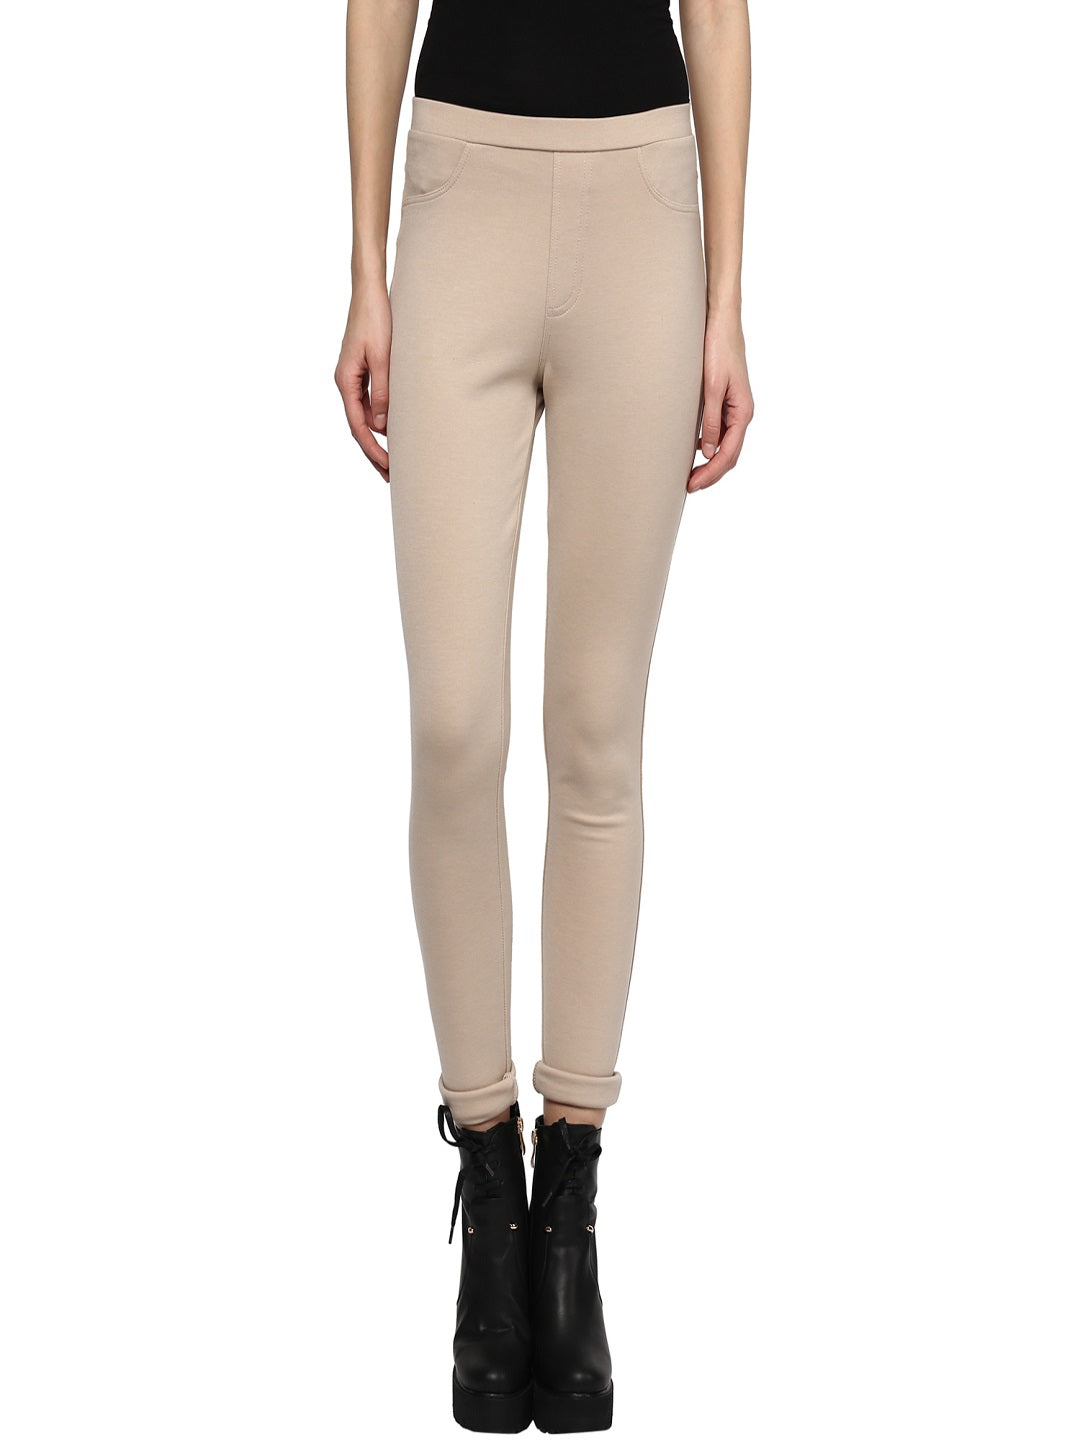 Gipsy Beige Casual Rayon Jegging